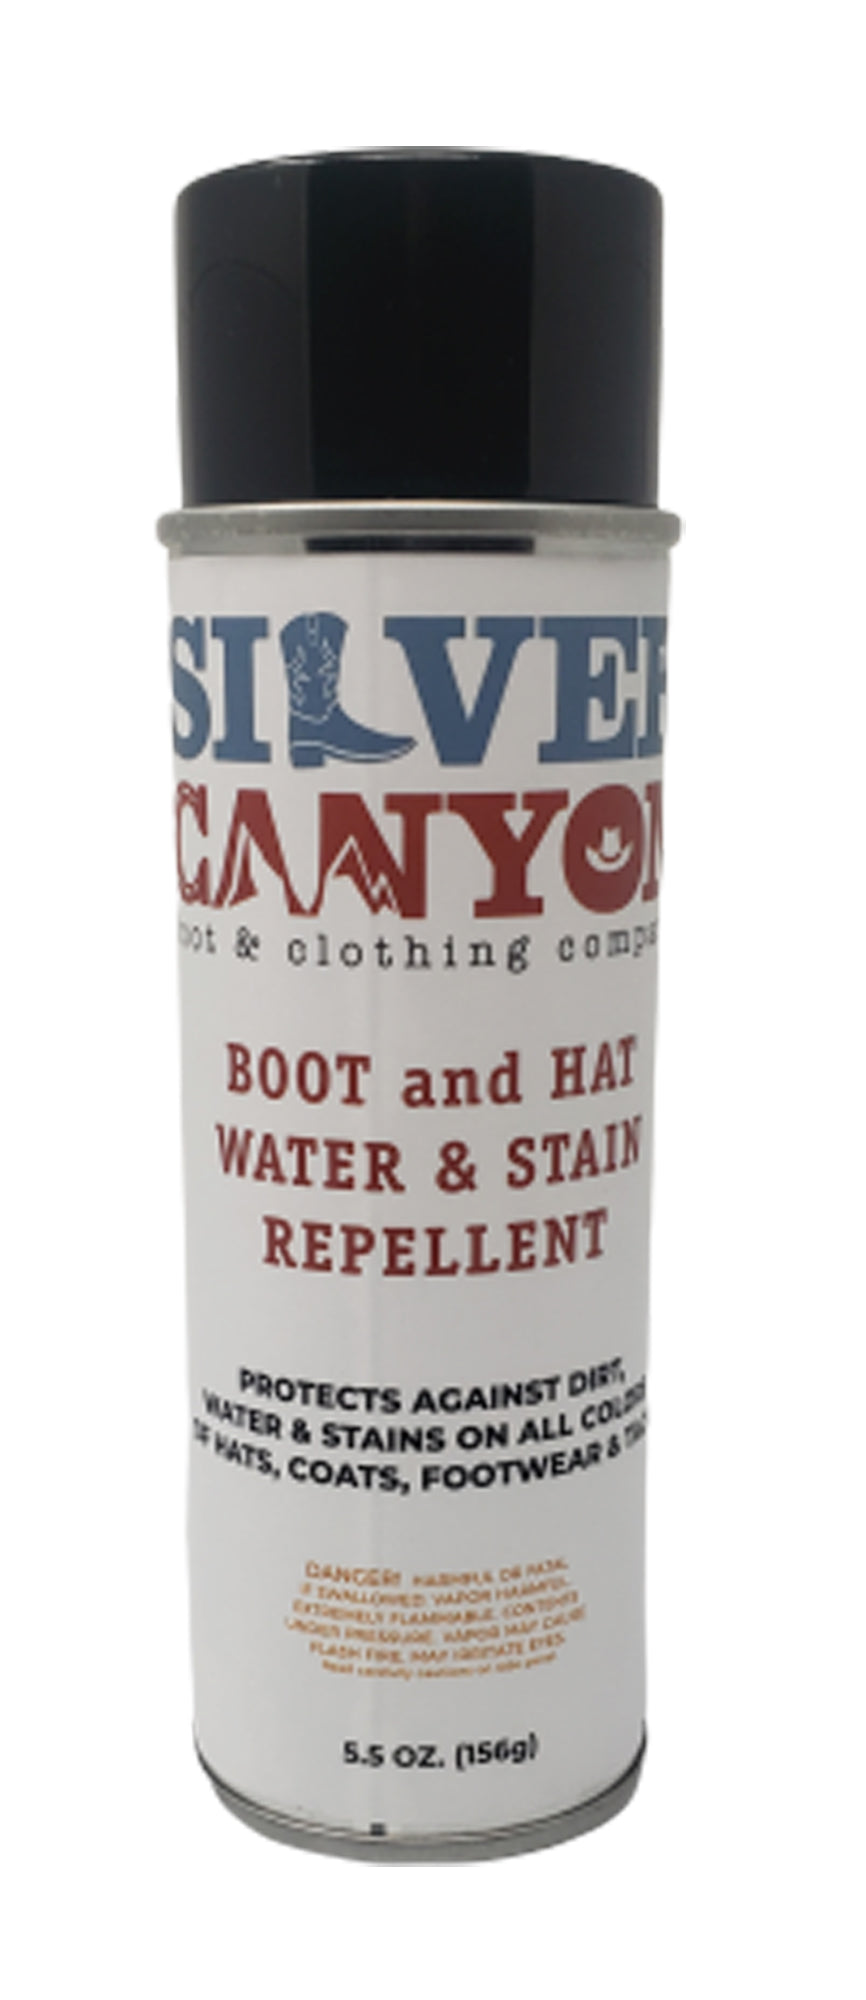 Silver Canyon Boot and Hat Water and Stain Repellent, 5.5oz, Leather a –  Silver Canyon Boot and Clothing Company